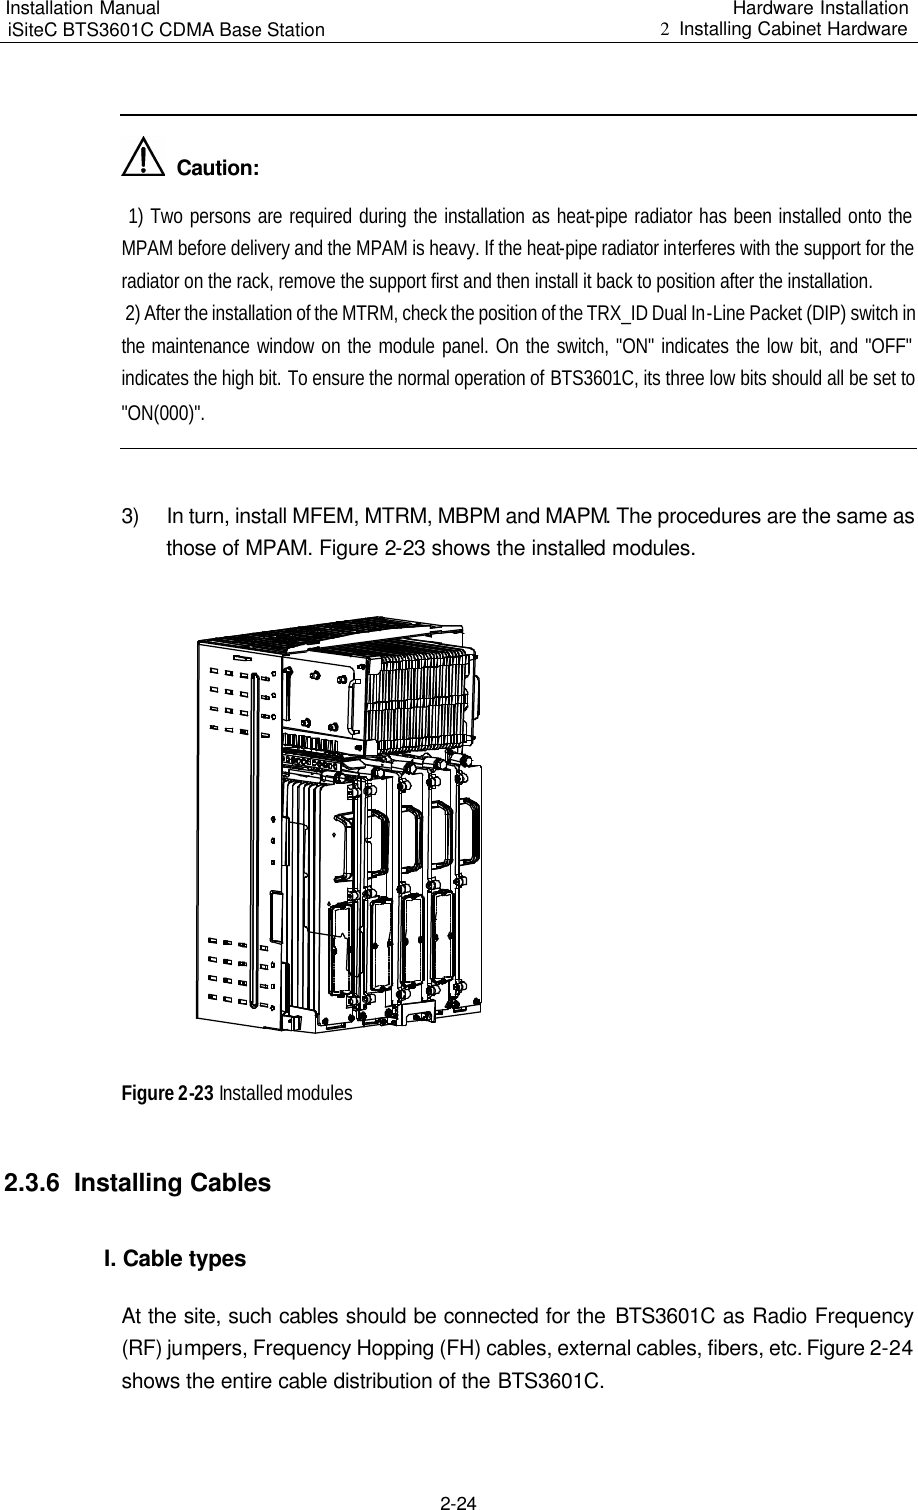 Installation Manual   iSiteC BTS3601C CDMA Base Station Hardware Installation 2  Installing Cabinet Hardware  2-24    Caution:  1) Two persons are required during the installation as heat-pipe radiator has been installed onto the MPAM before delivery and the MPAM is heavy. If the heat-pipe radiator interferes with the support for the radiator on the rack, remove the support first and then install it back to position after the installation.   2) After the installation of the MTRM, check the position of the TRX_ID Dual In-Line Packet (DIP) switch in the maintenance window on the module panel. On the switch, &quot;ON&quot; indicates the low bit, and &quot;OFF&quot; indicates the high bit. To ensure the normal operation of BTS3601C, its three low bits should all be set to &quot;ON(000)&quot;.   3) In turn, install MFEM, MTRM, MBPM and MAPM. The procedures are the same as those of MPAM. Figure 2-23 shows the installed modules.   Figure 2-23 Installed modules 2.3.6  Installing Cables I. Cable types At the site, such cables should be connected for the BTS3601C as Radio Frequency (RF) jumpers, Frequency Hopping (FH) cables, external cables, fibers, etc. Figure 2-24 shows the entire cable distribution of the BTS3601C.  